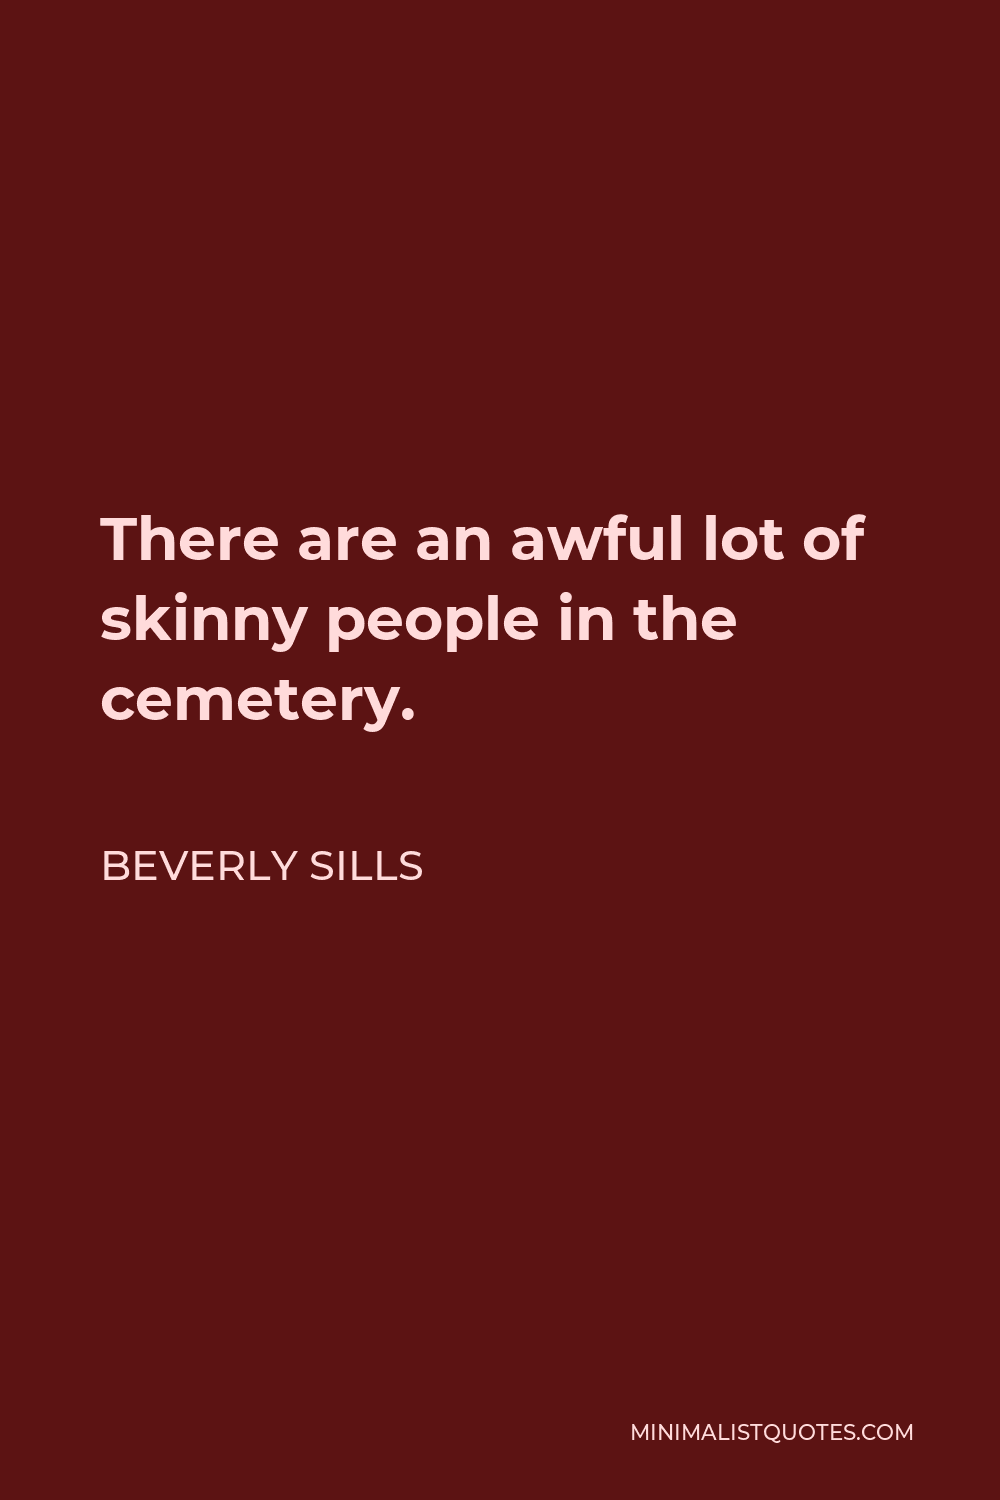 Beverly Sills Quote - There are an awful lot of skinny people in the cemetery.